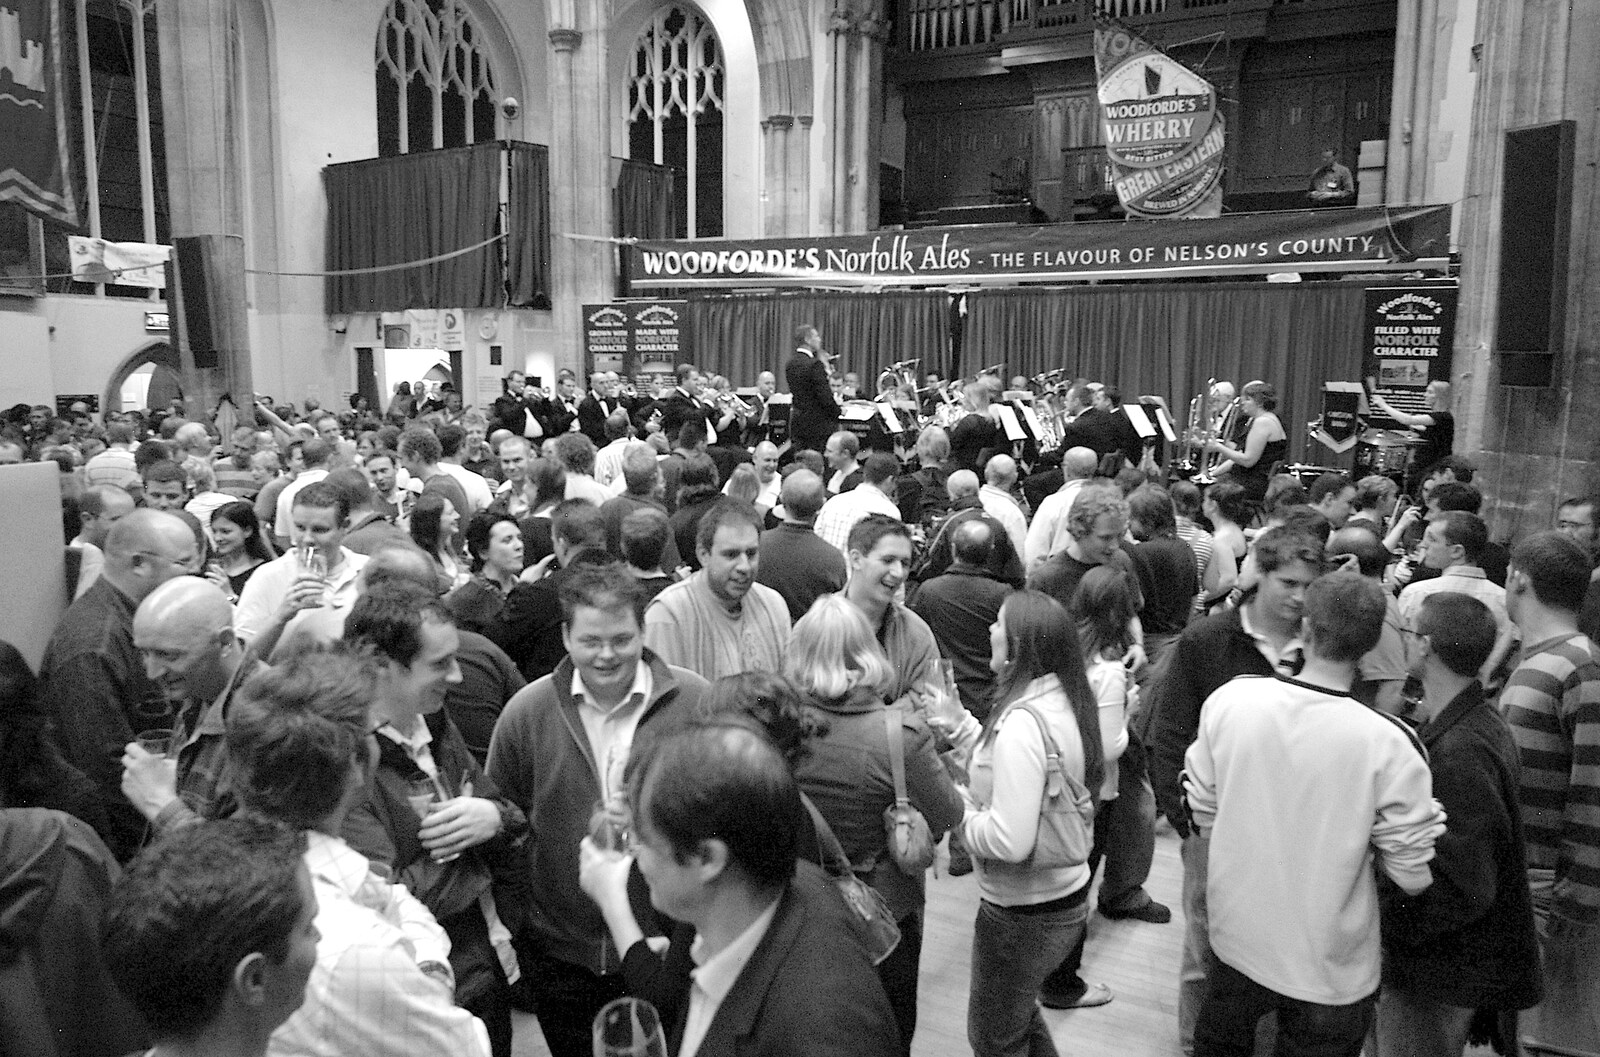 The packed hall from The CAMRA Norwich Beer Festival, St. Andrew's Hall, Norwich - 25th October 2006